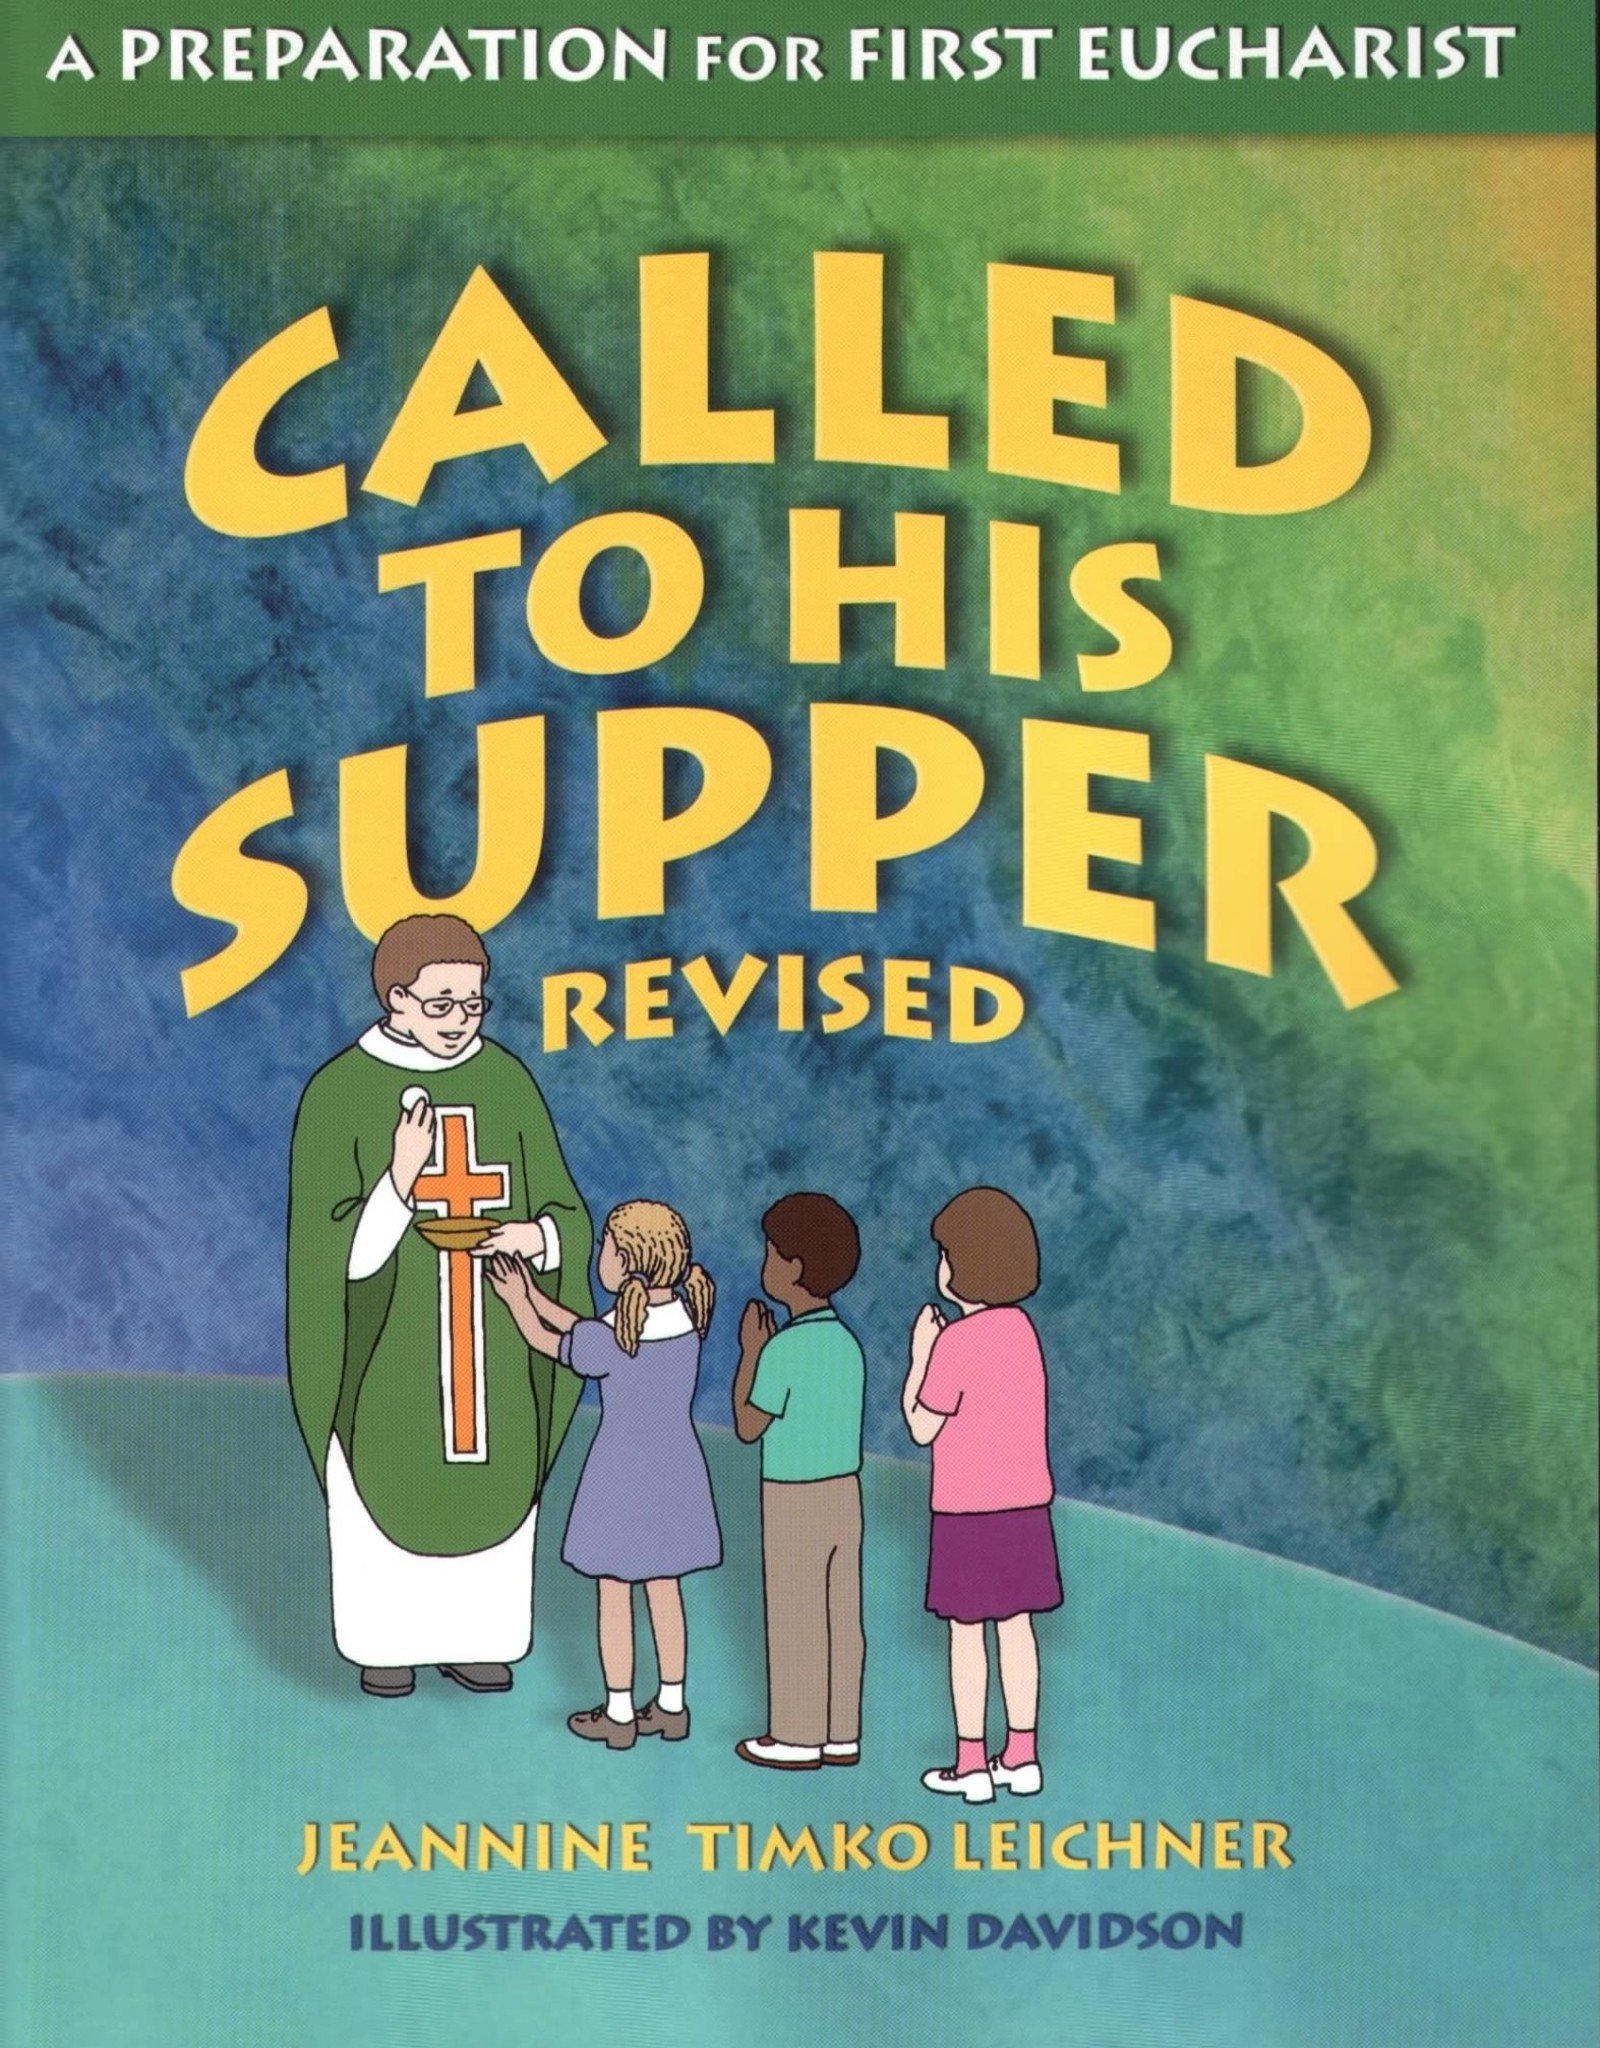 Called to His Supper: A Preparation for First Eucharist